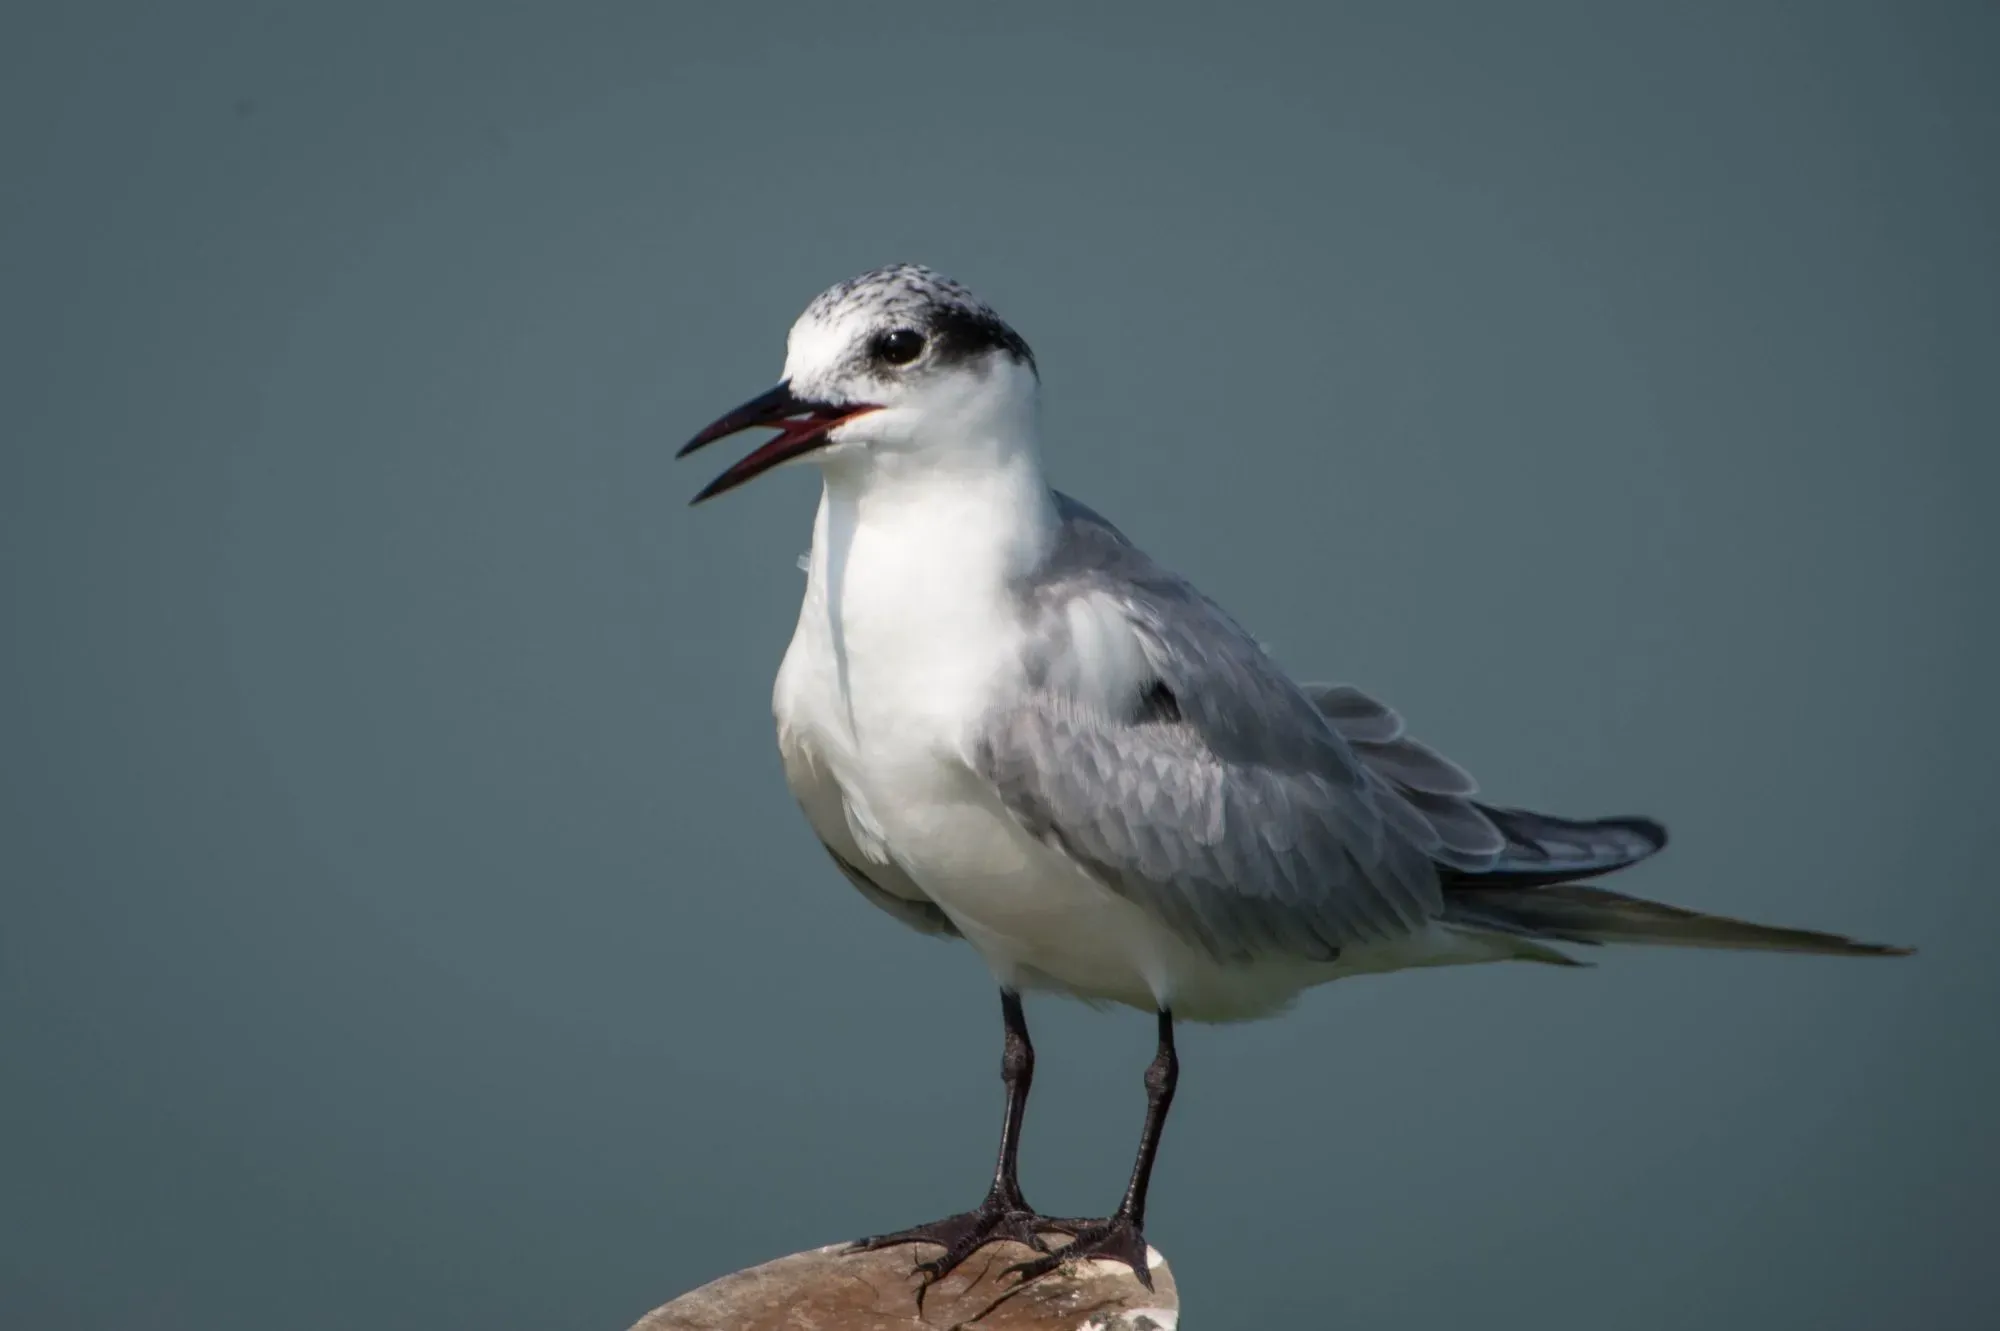 The white-winged black tern has a little darker breeding plumage with a black cap, however, it looks like a common tern in non-breeding plumage.